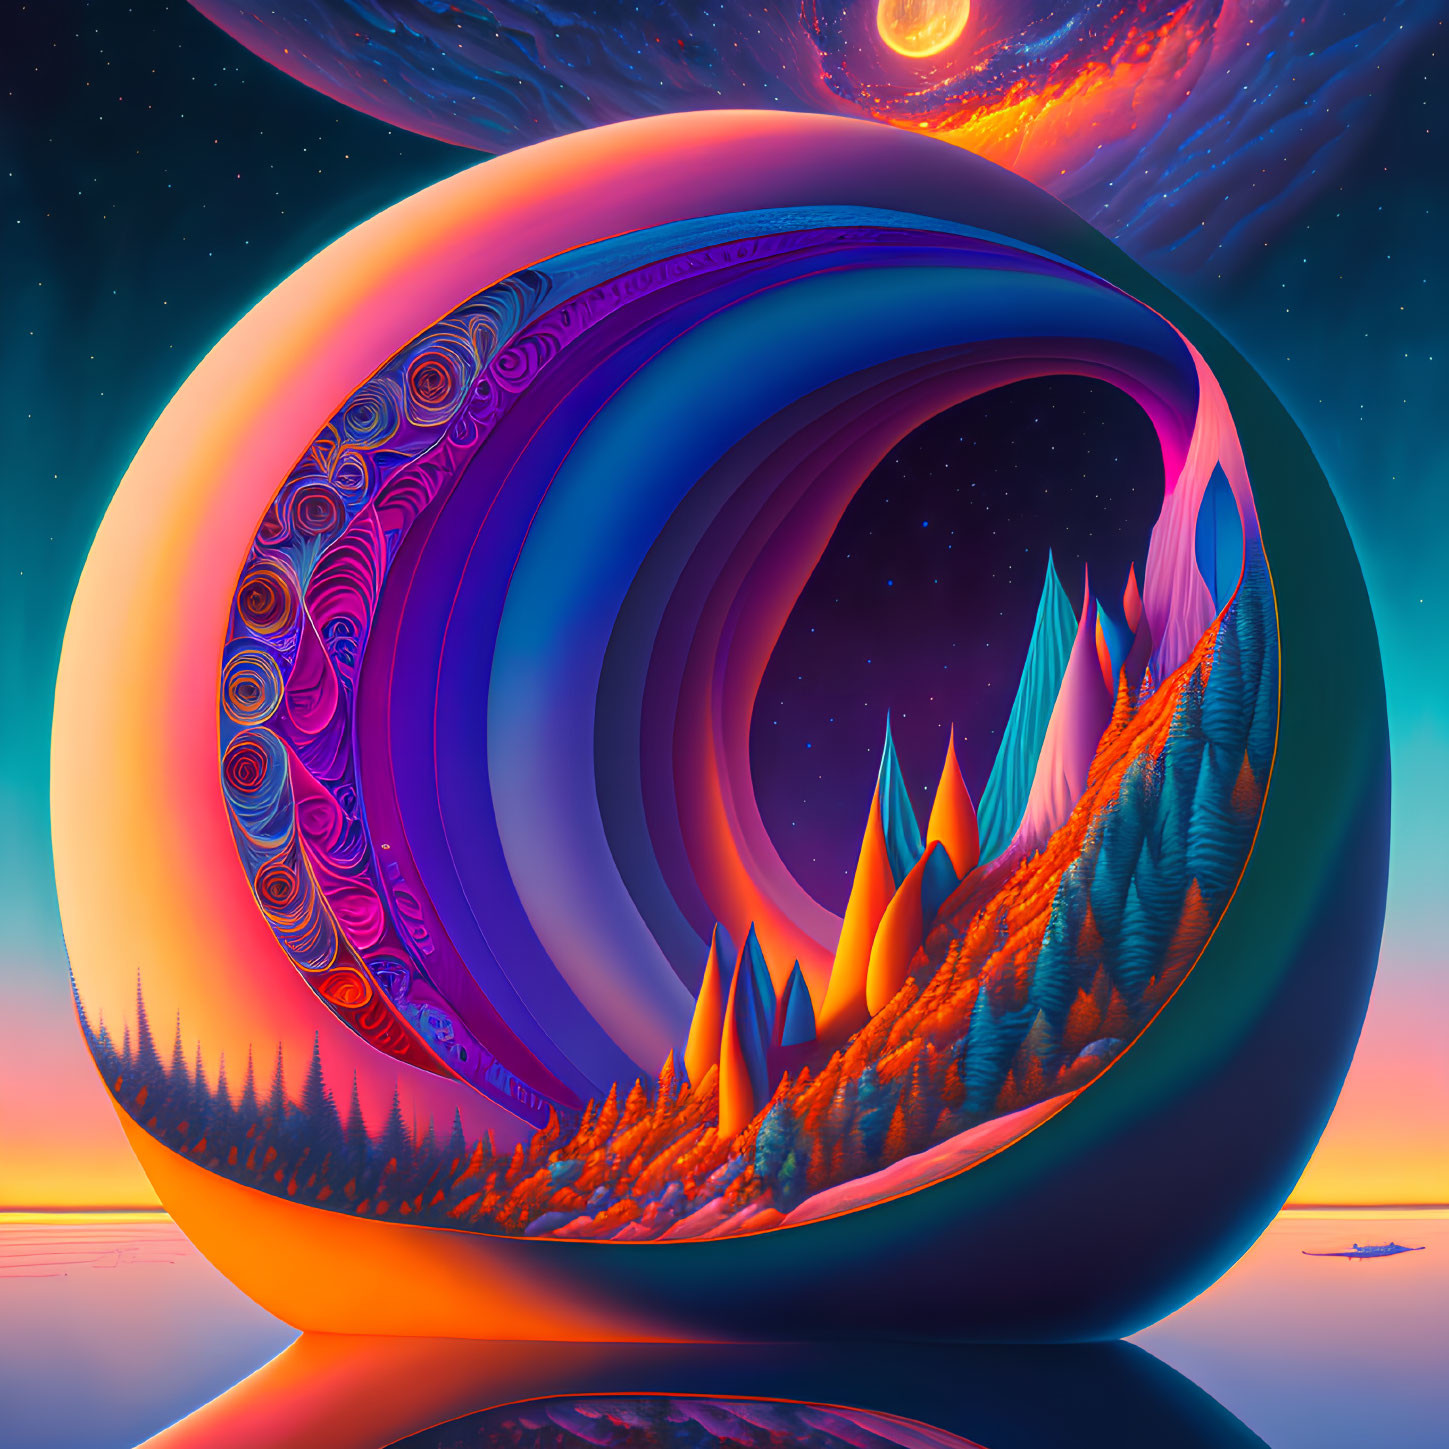 Colorful surrealistic landscape with swirling patterns, geometric mountains, and celestial background